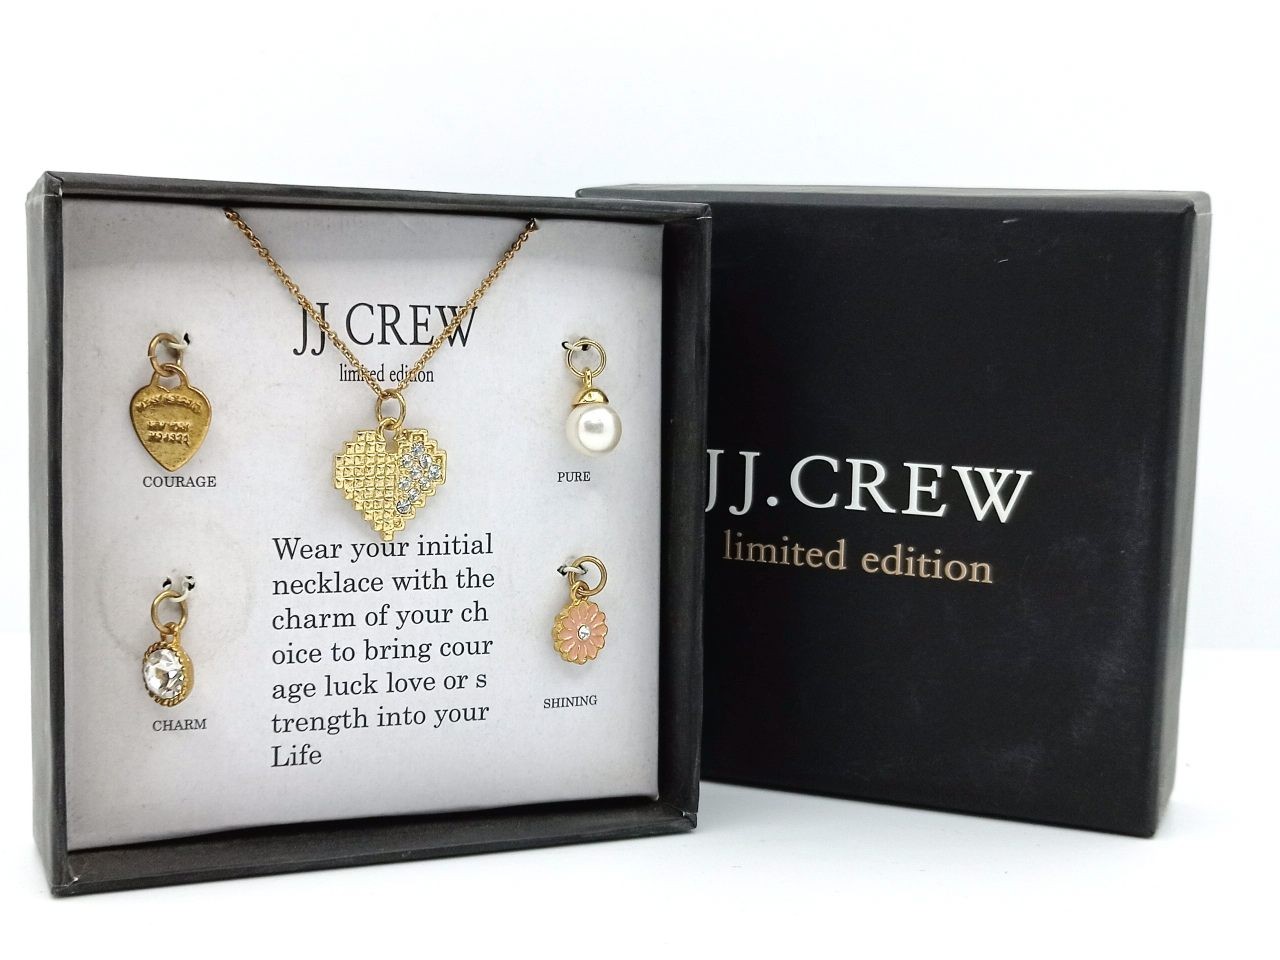 JJ.CREW LIMITED EDITION NECKLACE